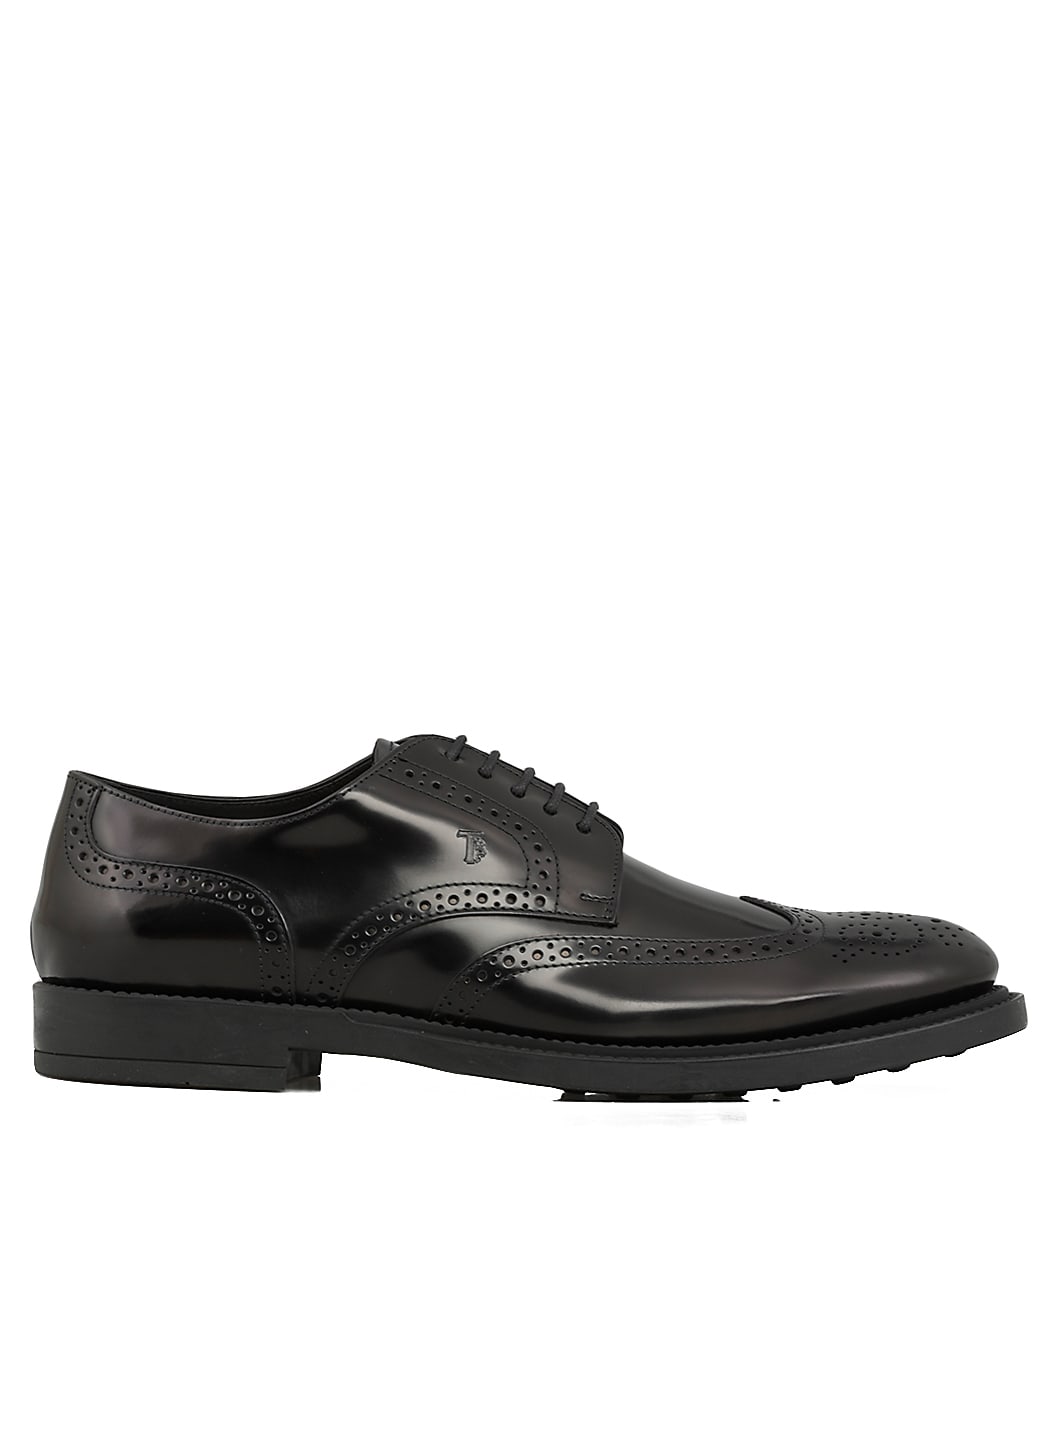 Tods Leather Lace Up Shoe